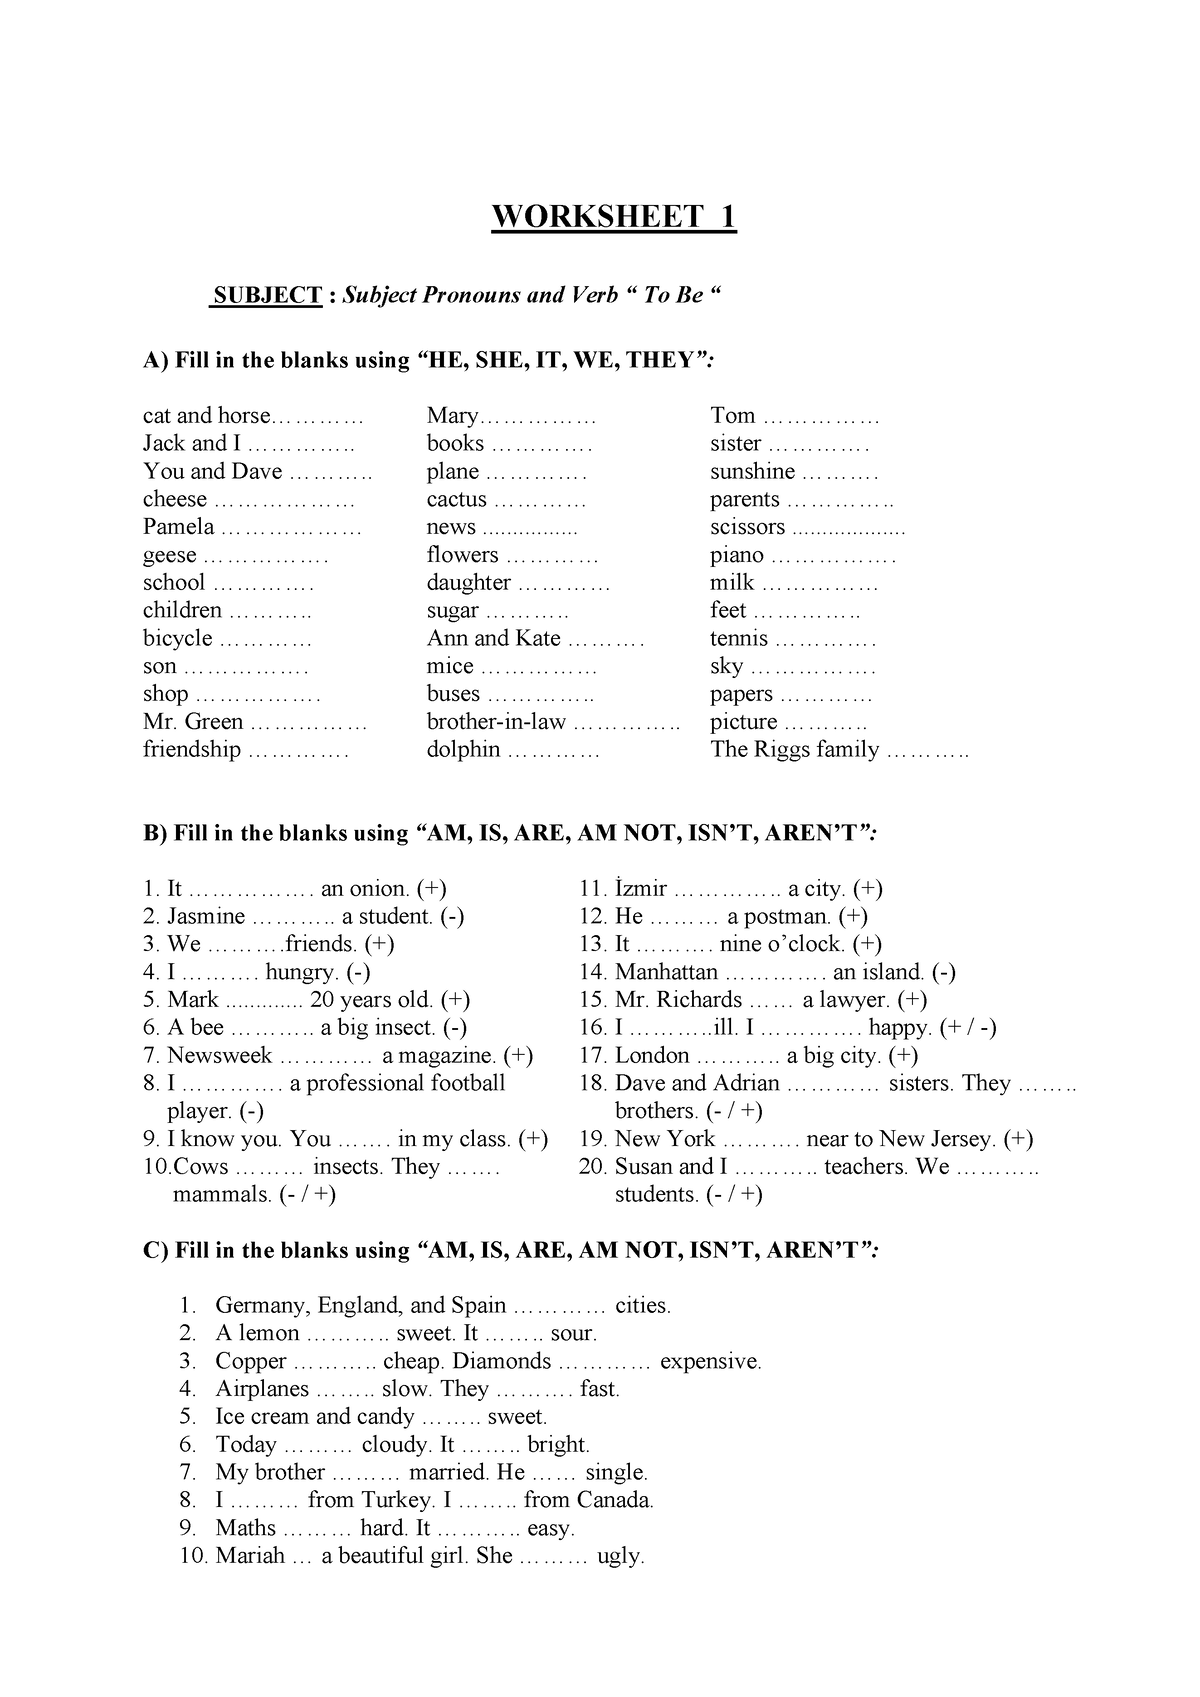 ejercicios-de-verb-to-be-in-present-simple-worksheet-1-subject